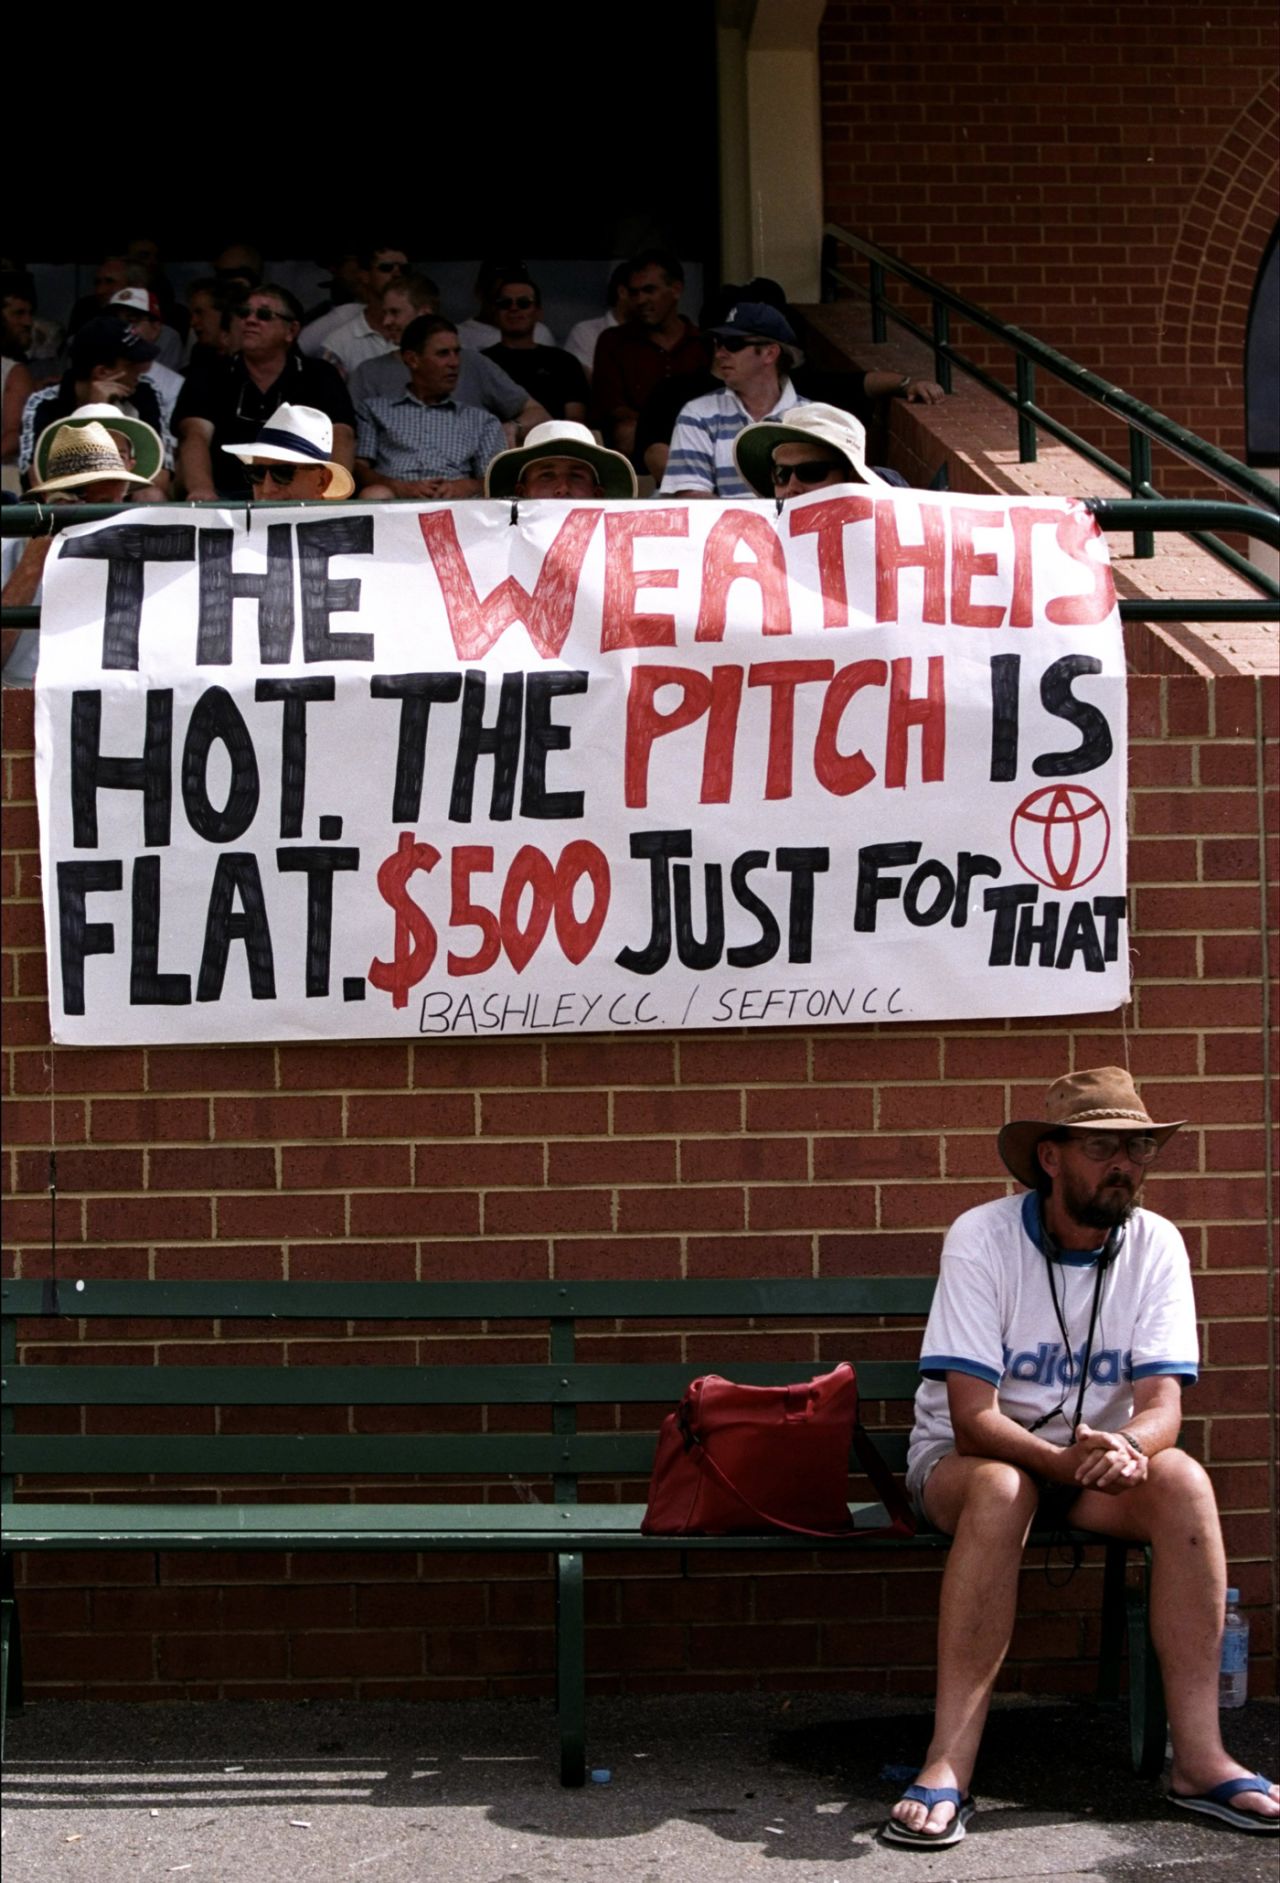 Spectators display a banner referring to the betting scandal involving Mark Waugh and Shane Warne, third Test, Australia v England, Adelaide, 11 December 1998